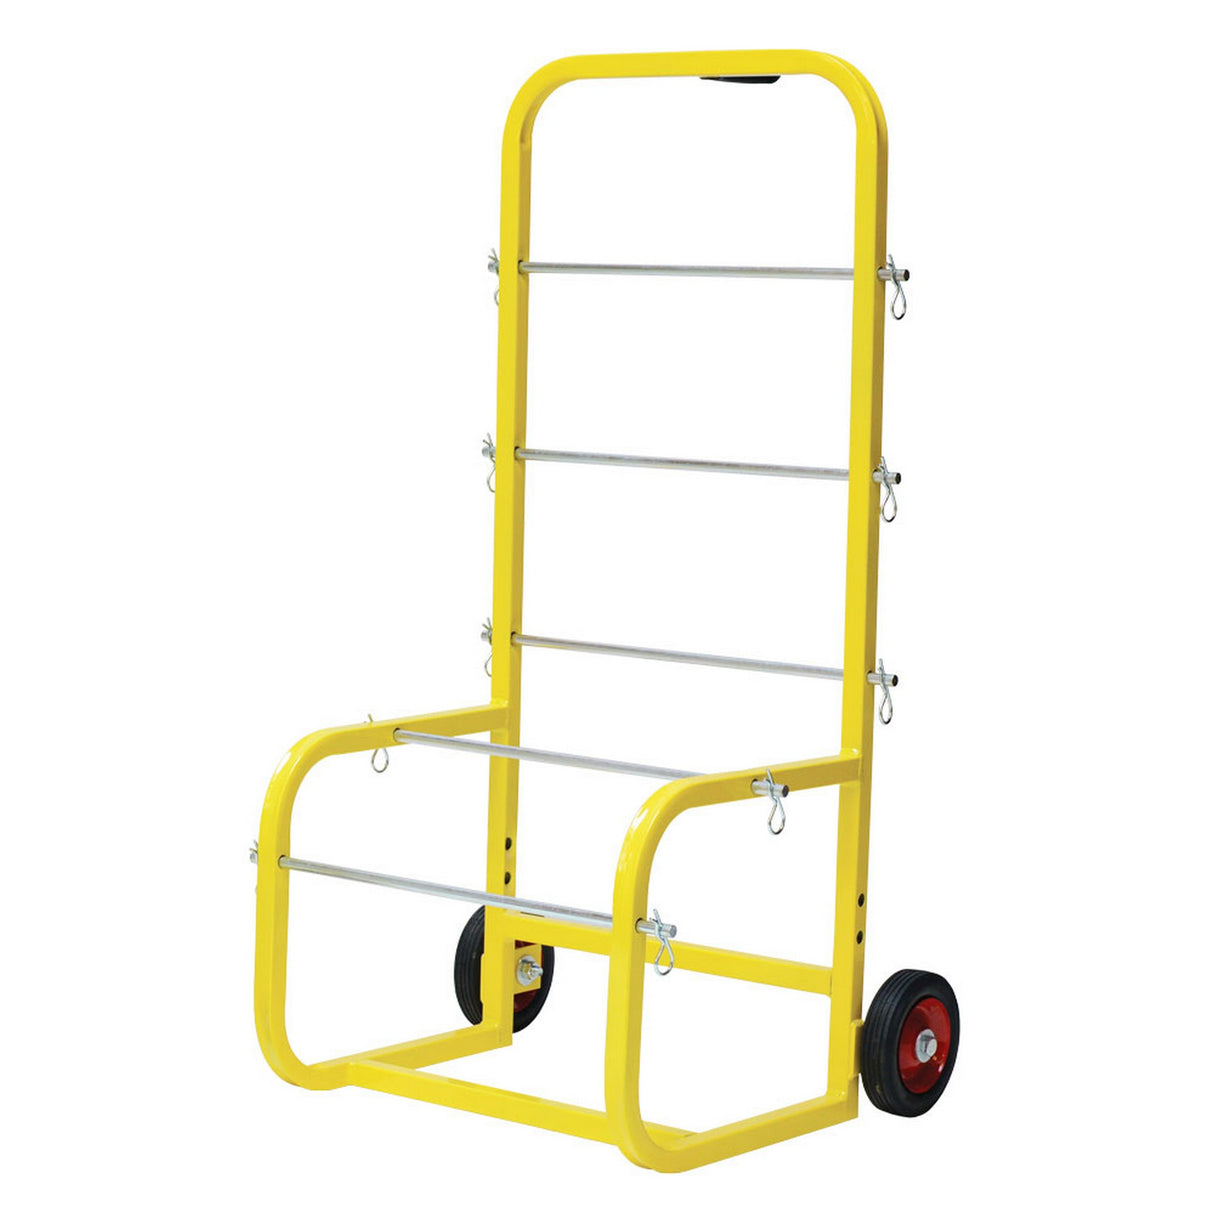 SpoolMaster SMP-CC Cable Reel and Wire Spool Multi-Bar Cart, 17